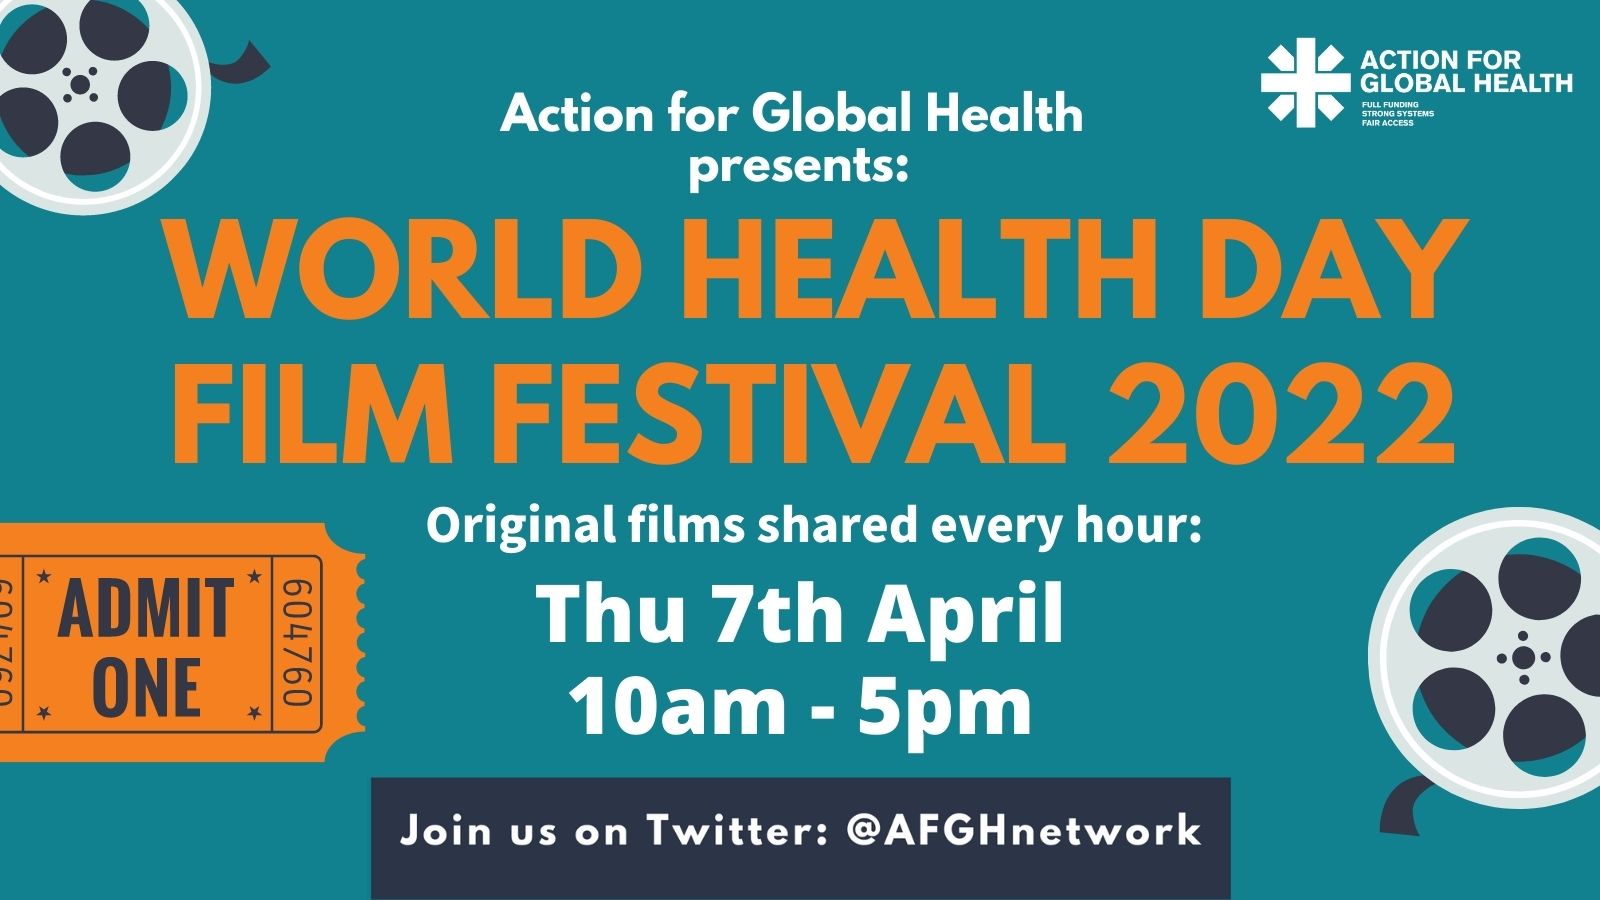 Action For Global Health Premiere NEW Healthy Futures Campaign Video At Their #WorldHealthDay Film Festival